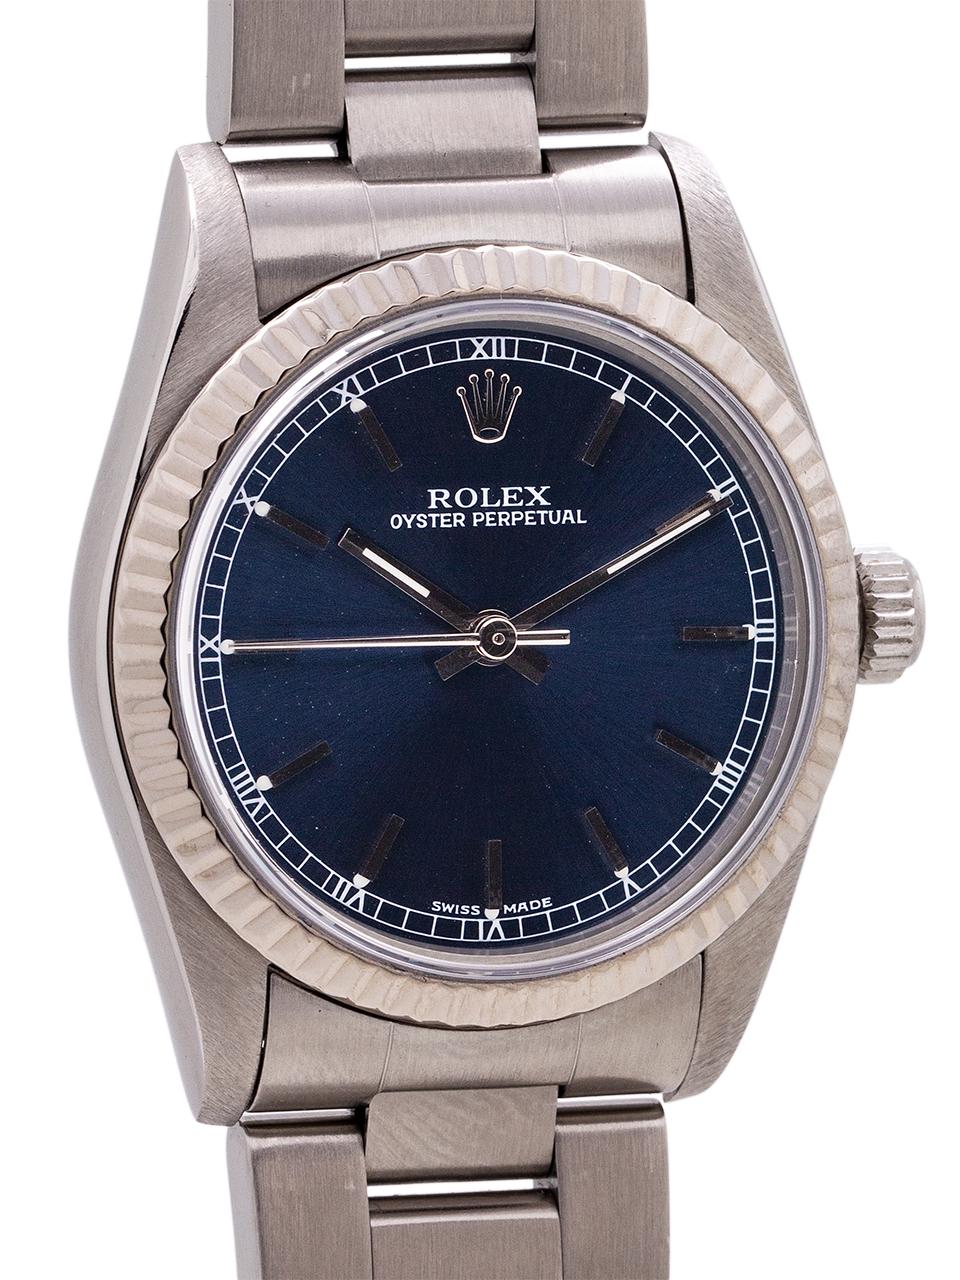 
Rolex midsize Oyster Perpetual ref 67514, circa 1995 featuring a 31mm diameter Oyster case with 18K white gold fluted bezel and sapphire crystal. With popular original blue dial with applied stick indexes and silver baton hands. Powered by self